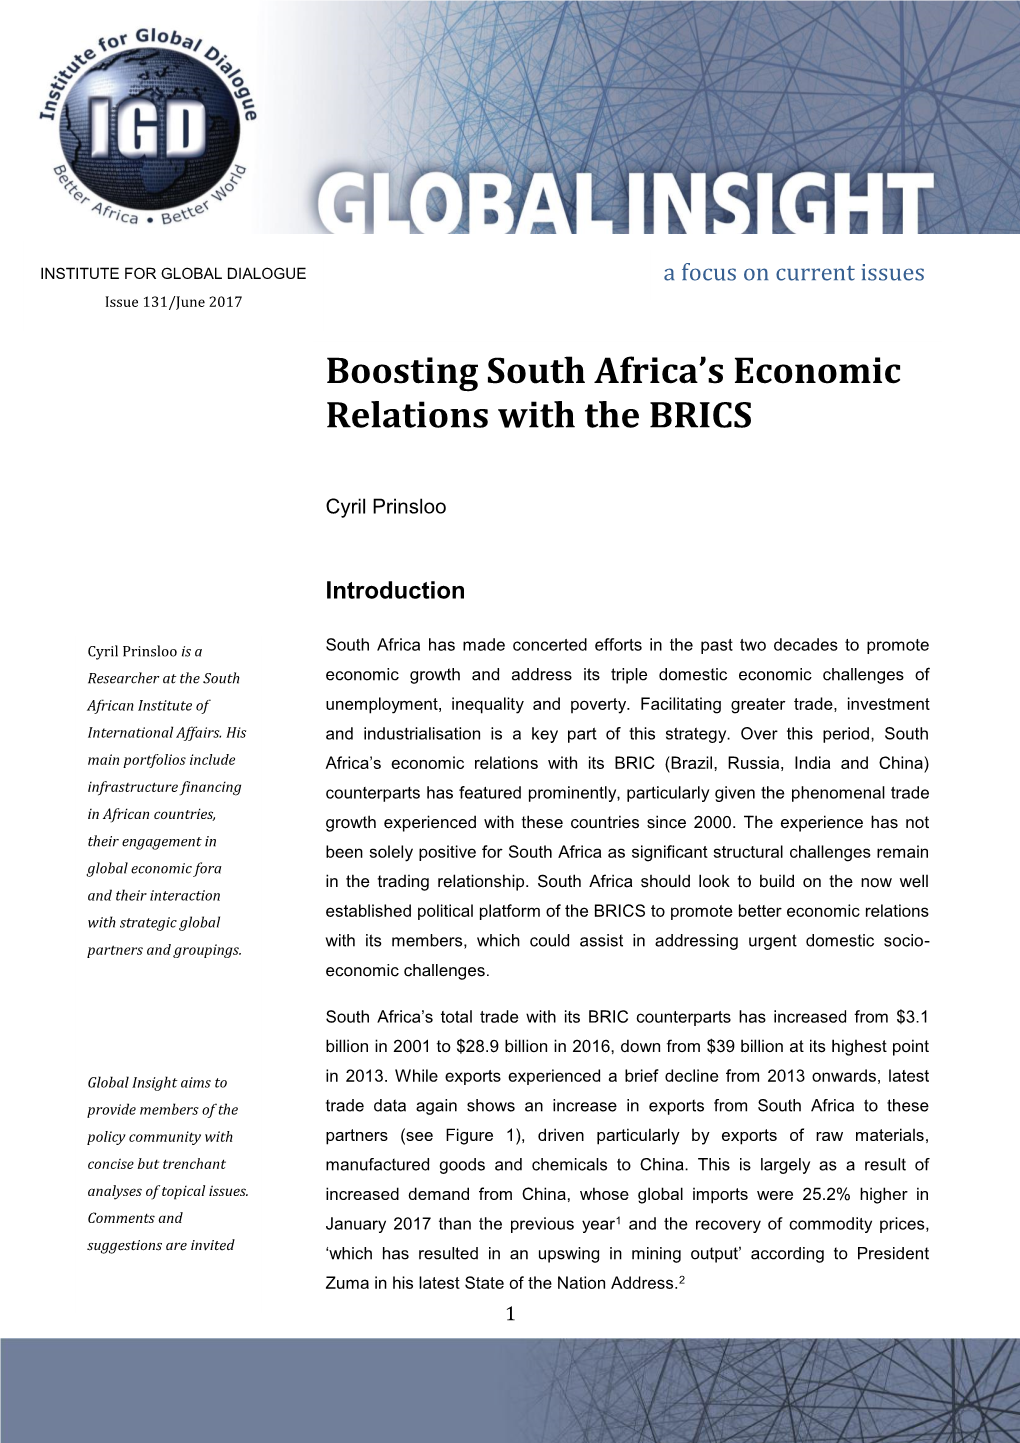 Boosting South Africa's Economic Relations with the BRICS